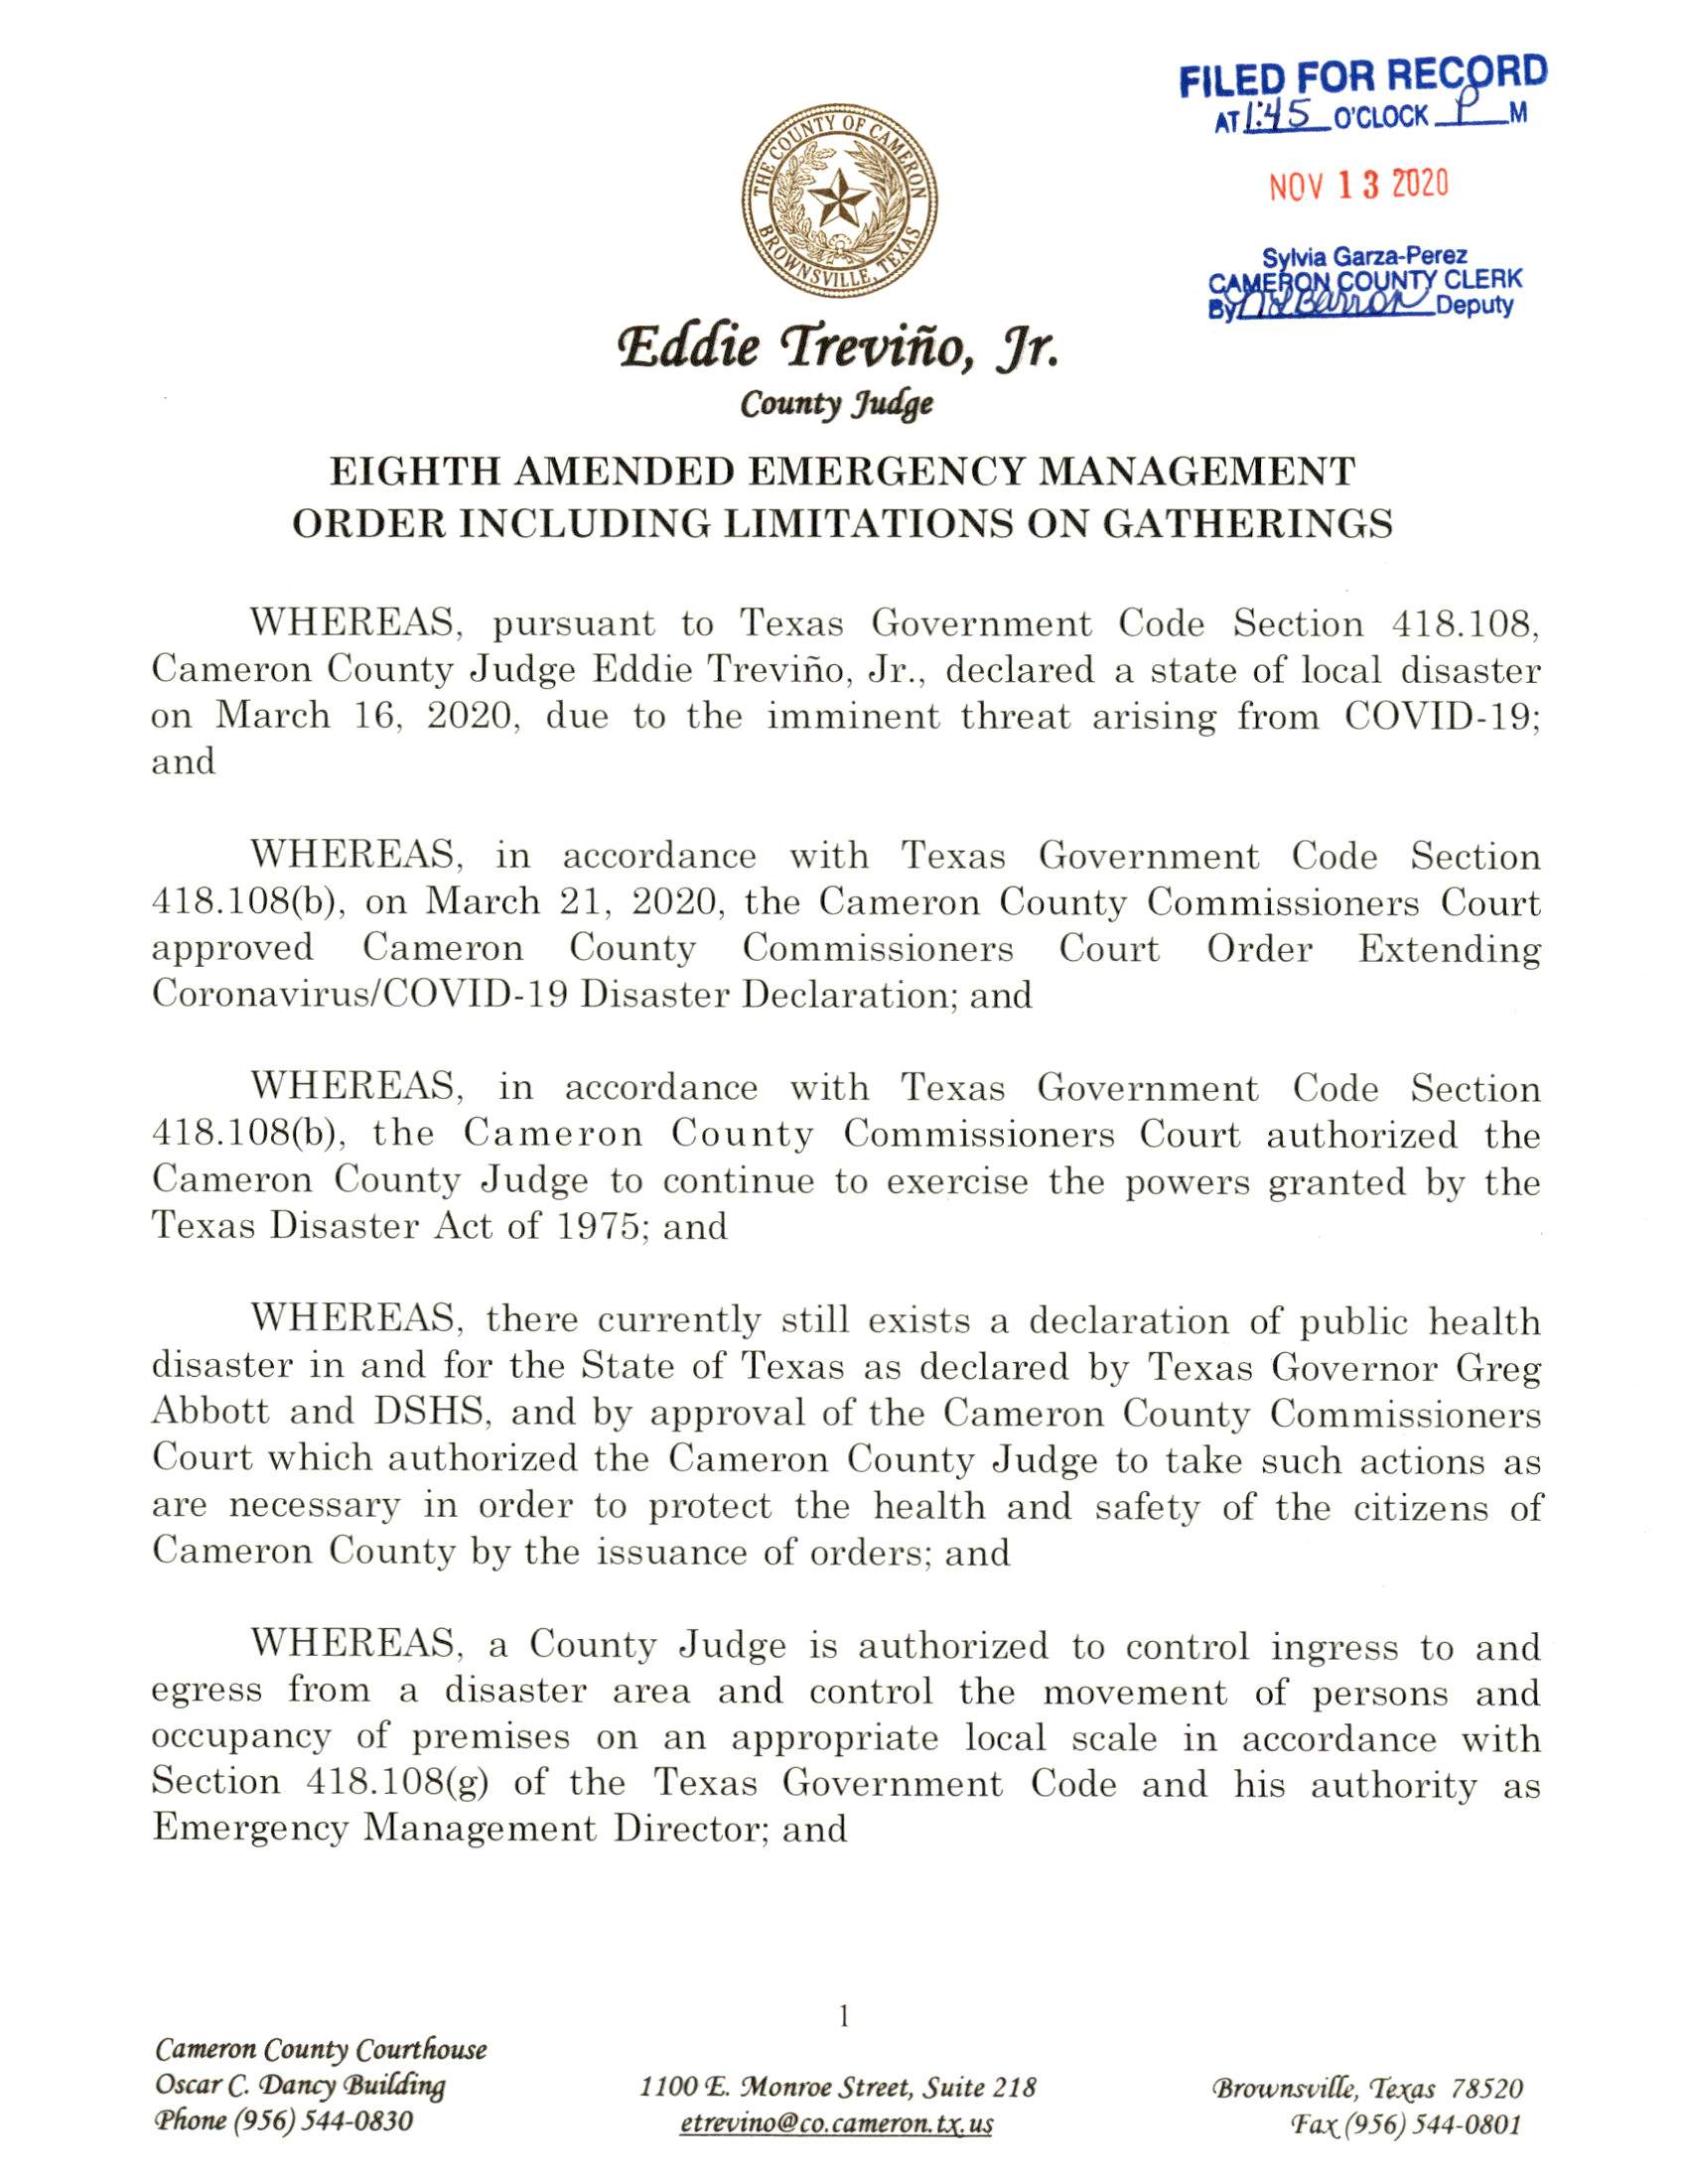 2020.11.13 Eight Amended Emergency Management Order Including Limitations On Gatherings 004 Page 1